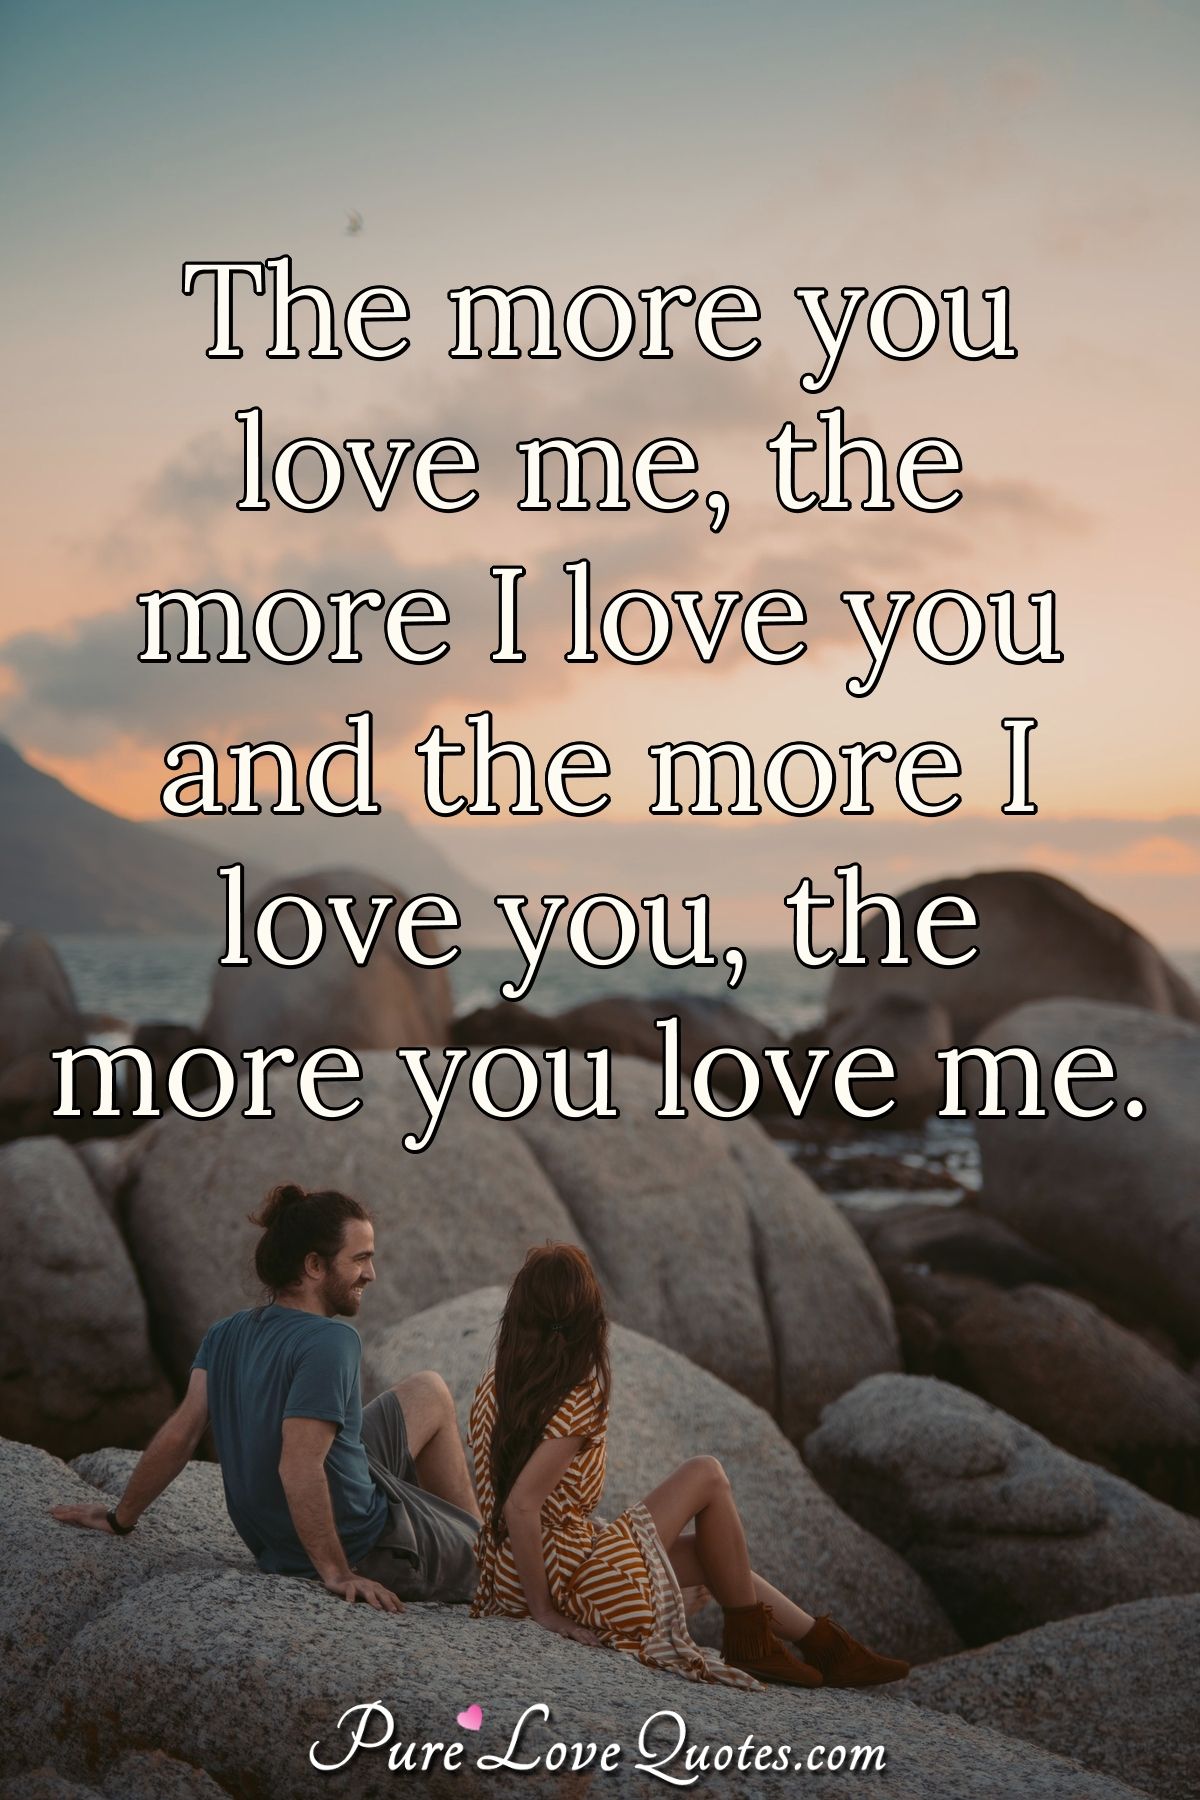 Pure Love Quotes on X: The more you love me, the more I love you and the  more I love you, the more you love me. #quote #loveme #quotes #lovemequotes    /